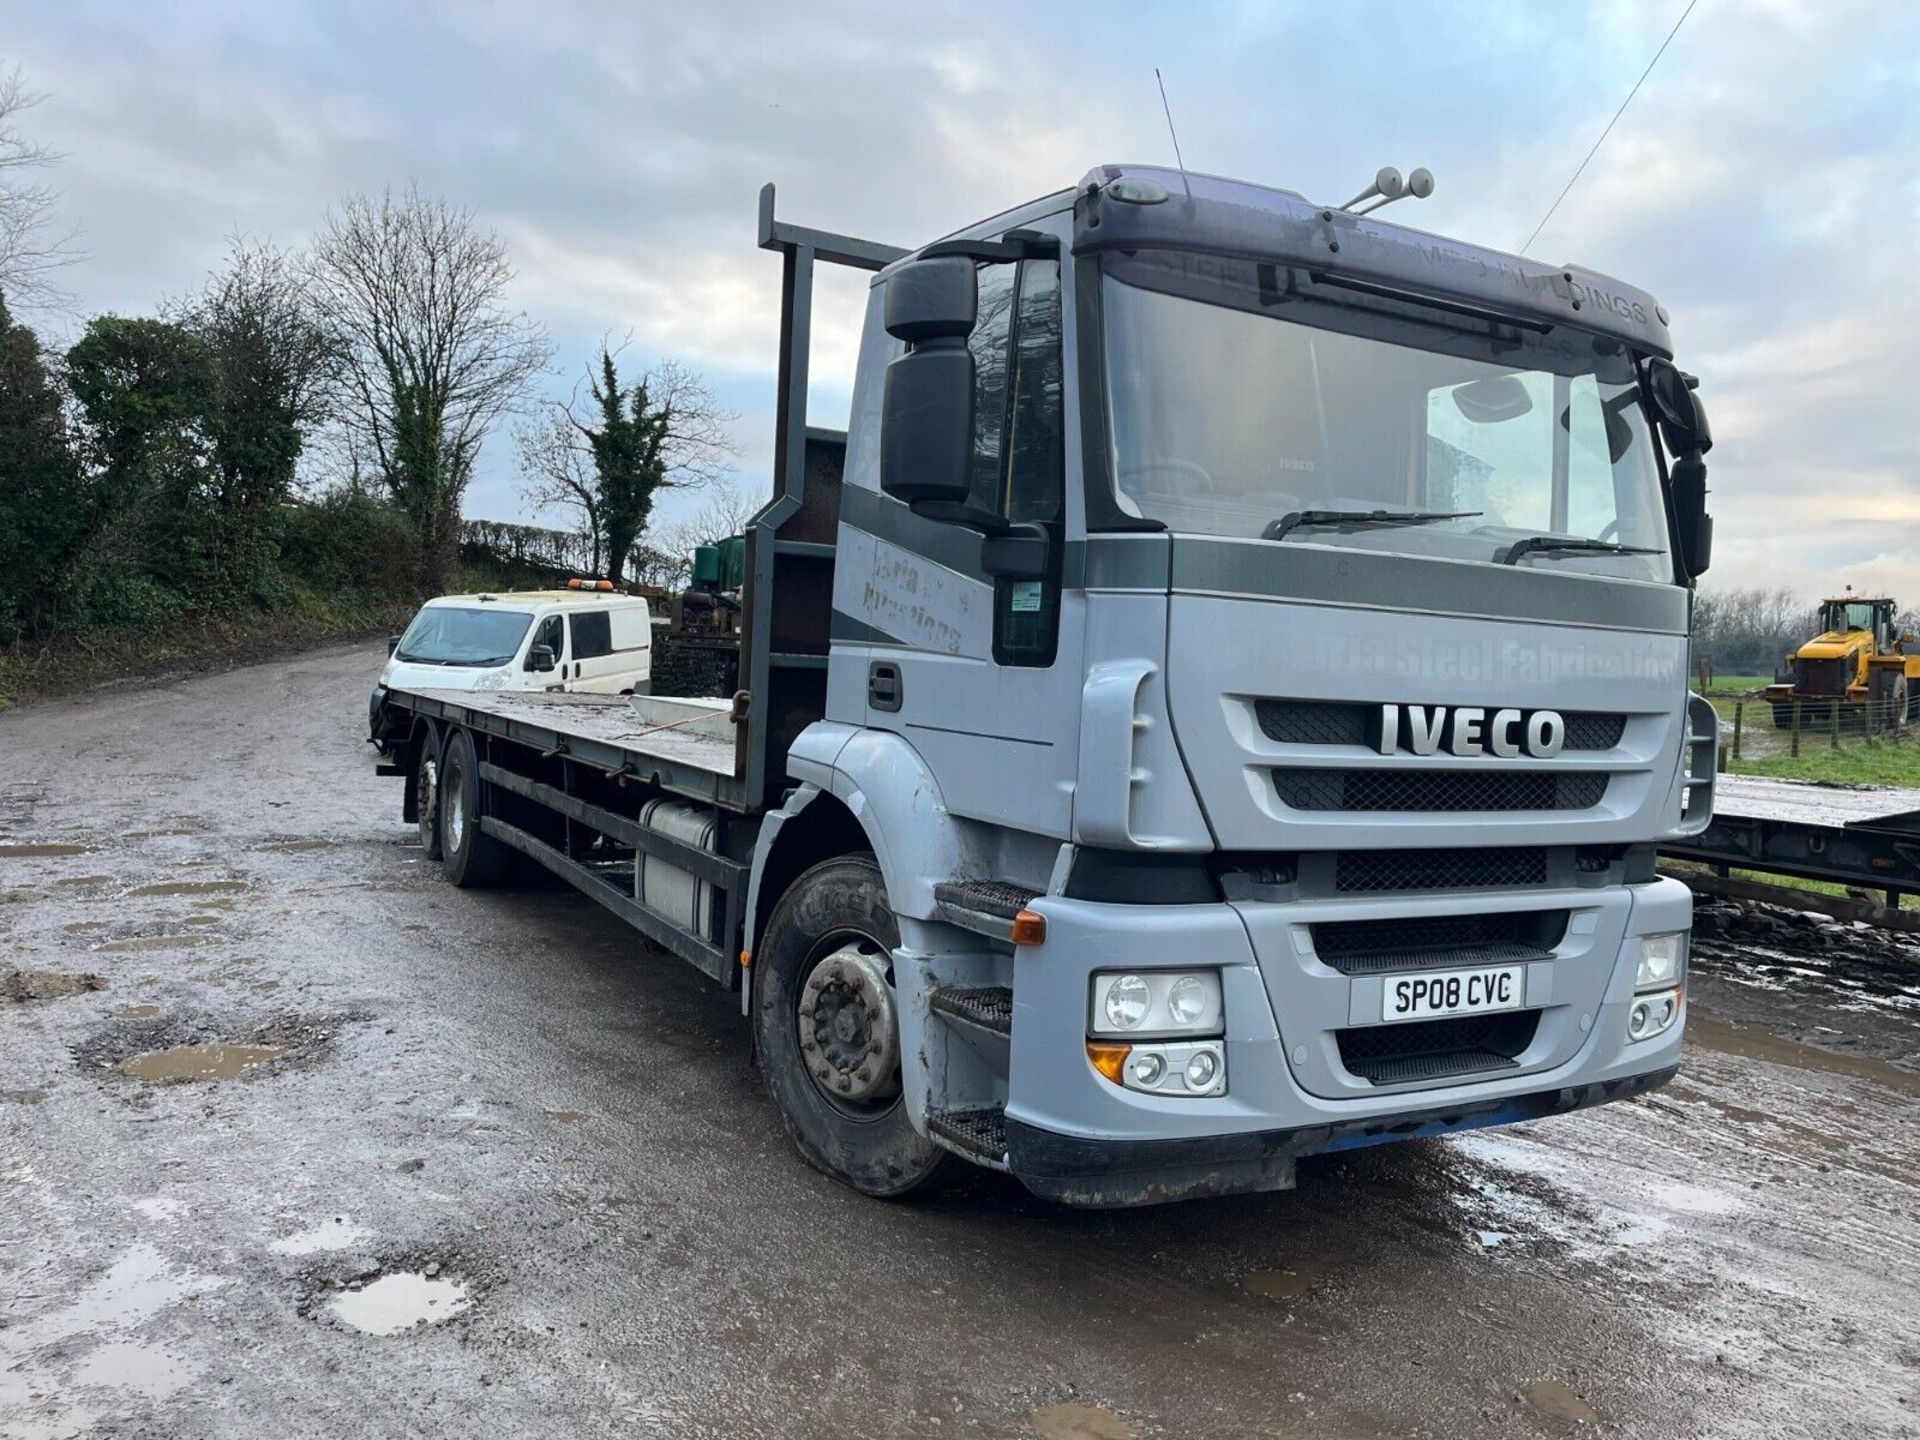 SMOOTH MOVES: AUTOMATIC 2008 IVECO STRALIS PLANT WAGON FOR SALE